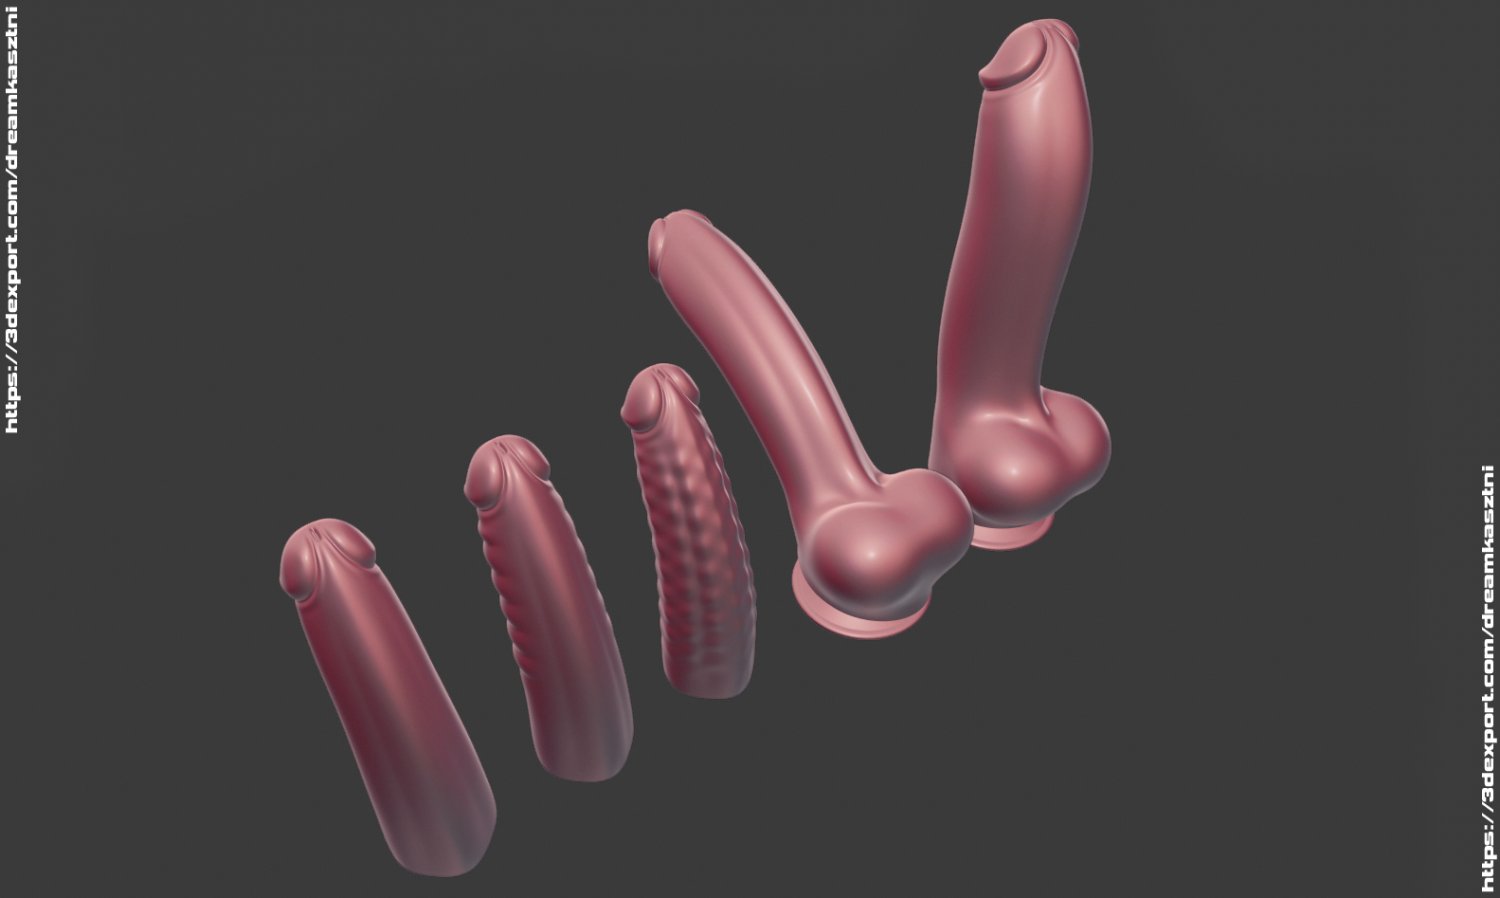 Penis dildo vibrator adult toy - pack 3 - Suitable for games renders printi...